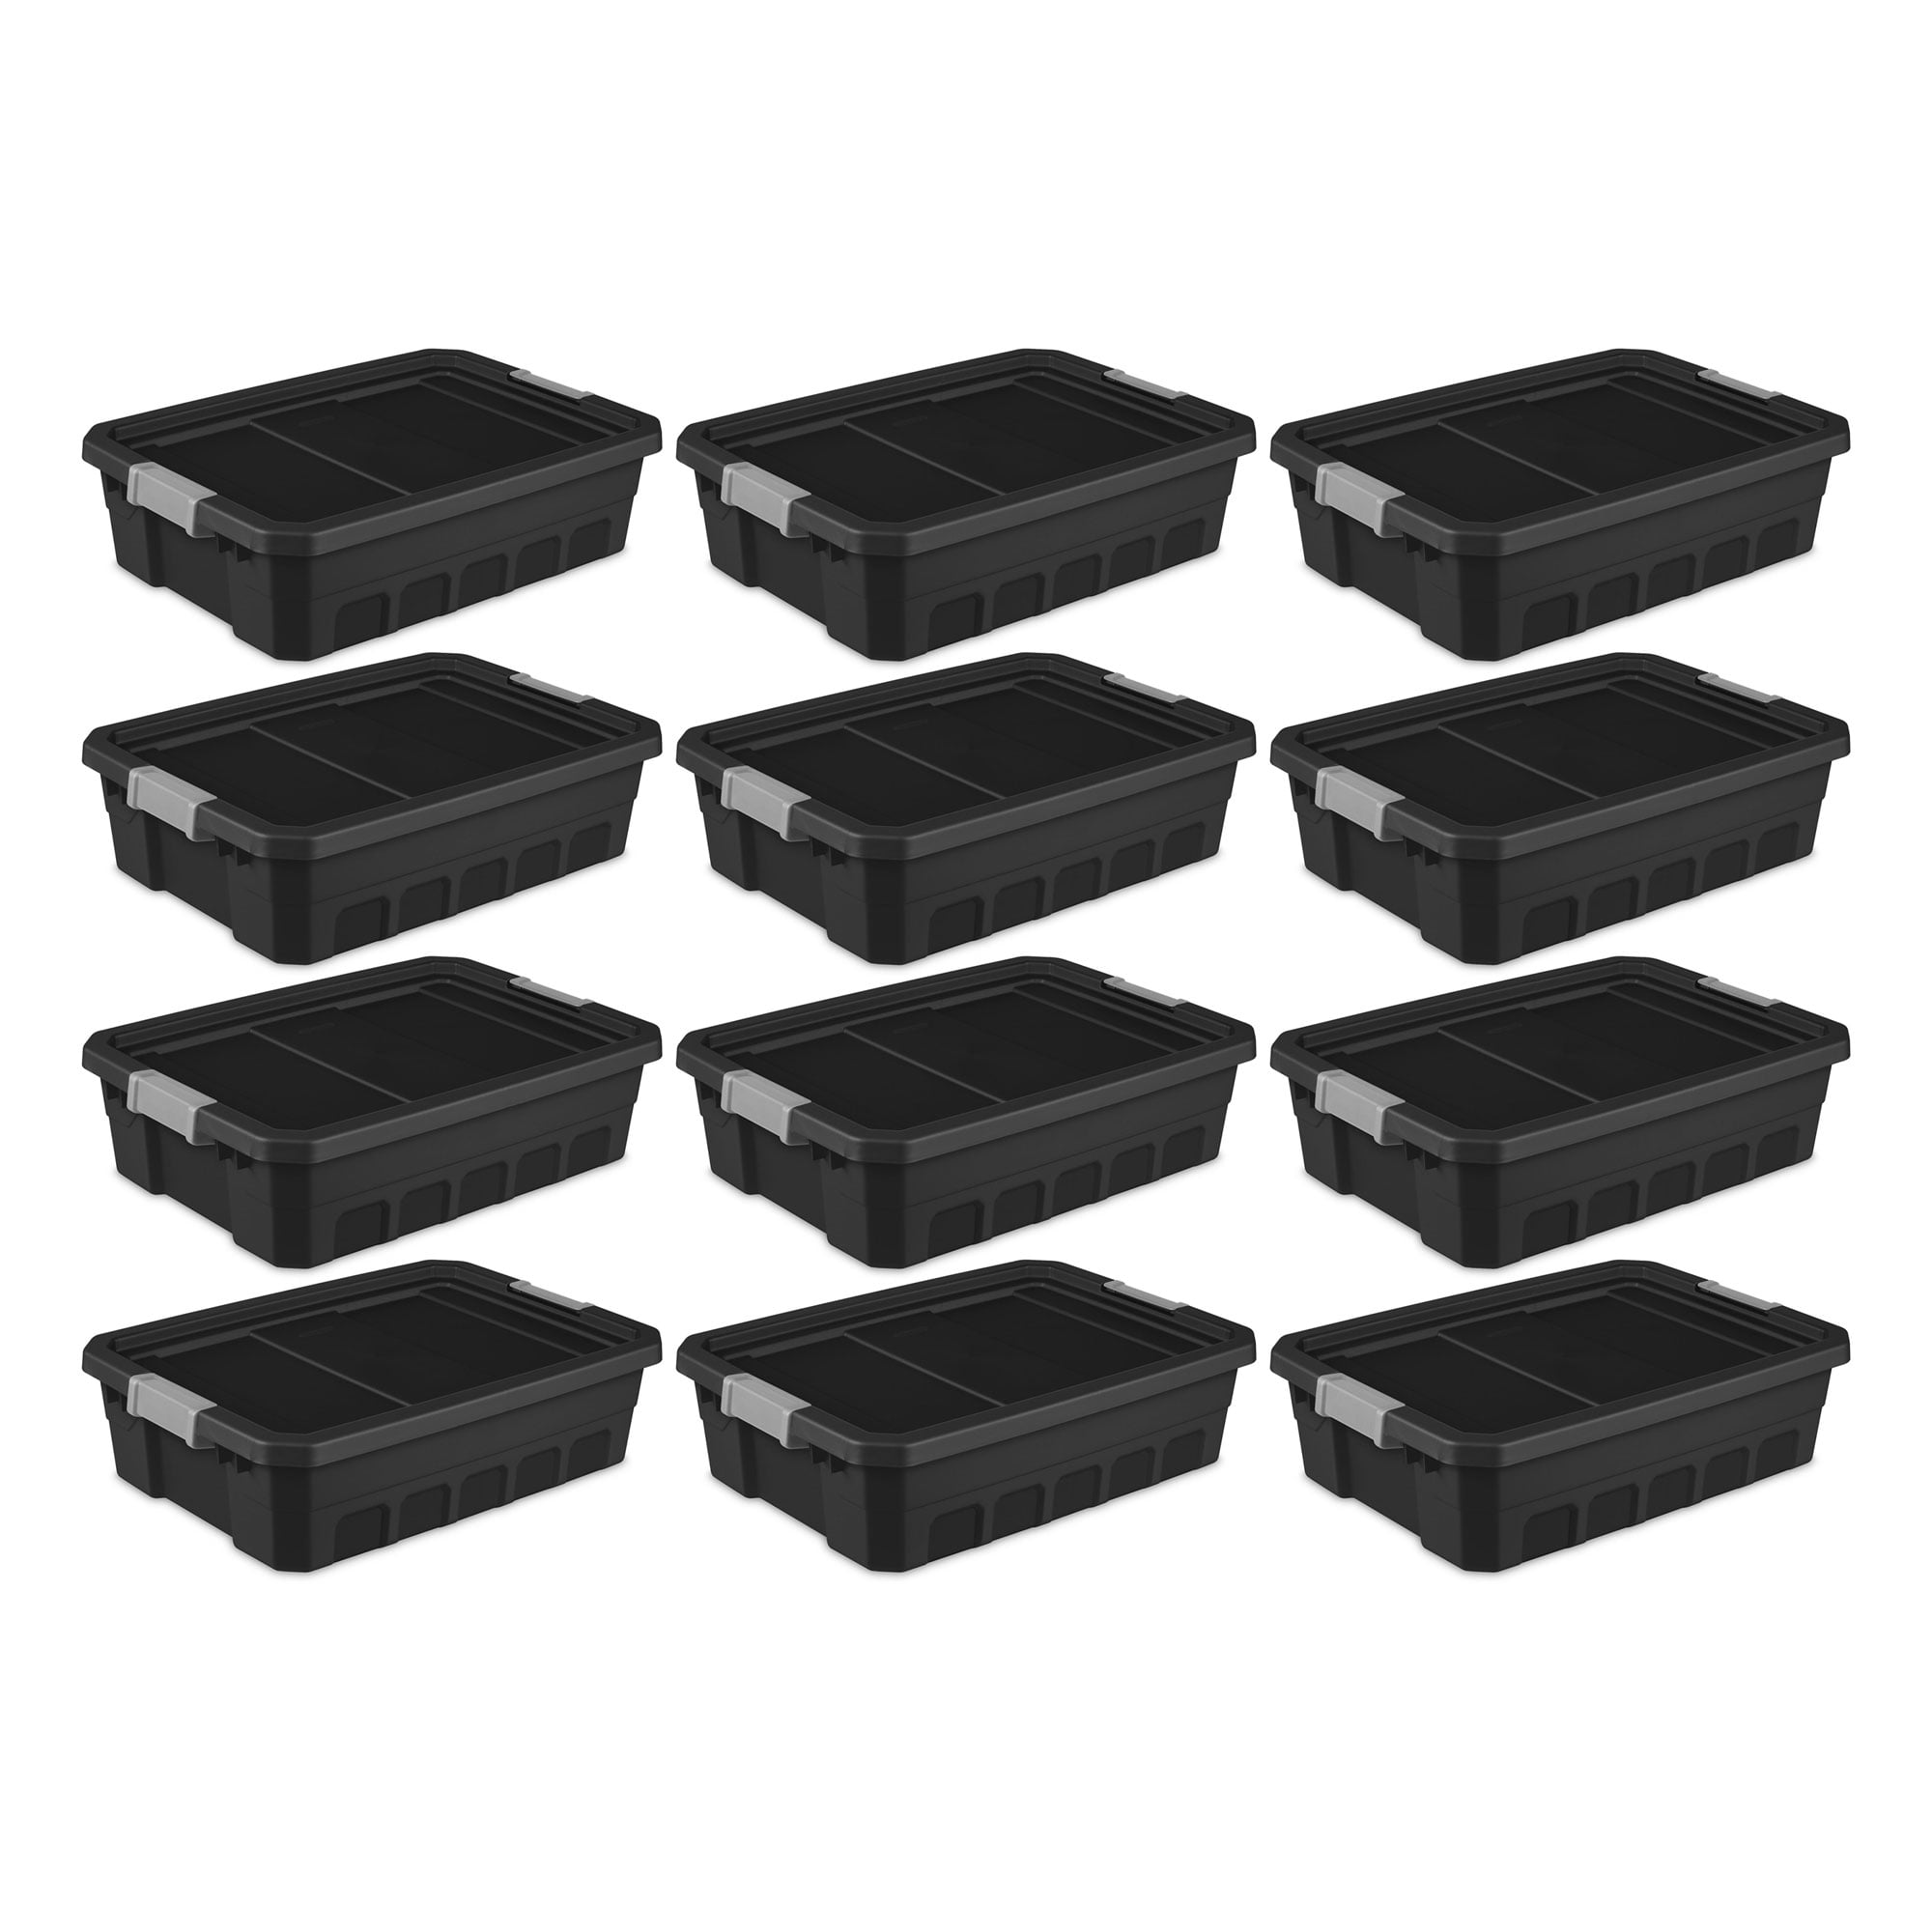  CX CRAFTSMAN, 10-Gallon Highly Durable Storage Bin & Dual  Latching Lid, (12.7”H x 15.7”W x 22.7”D), Versatile Stacking Tote and  Weather-Resistant Design, American Made [4 Pack]